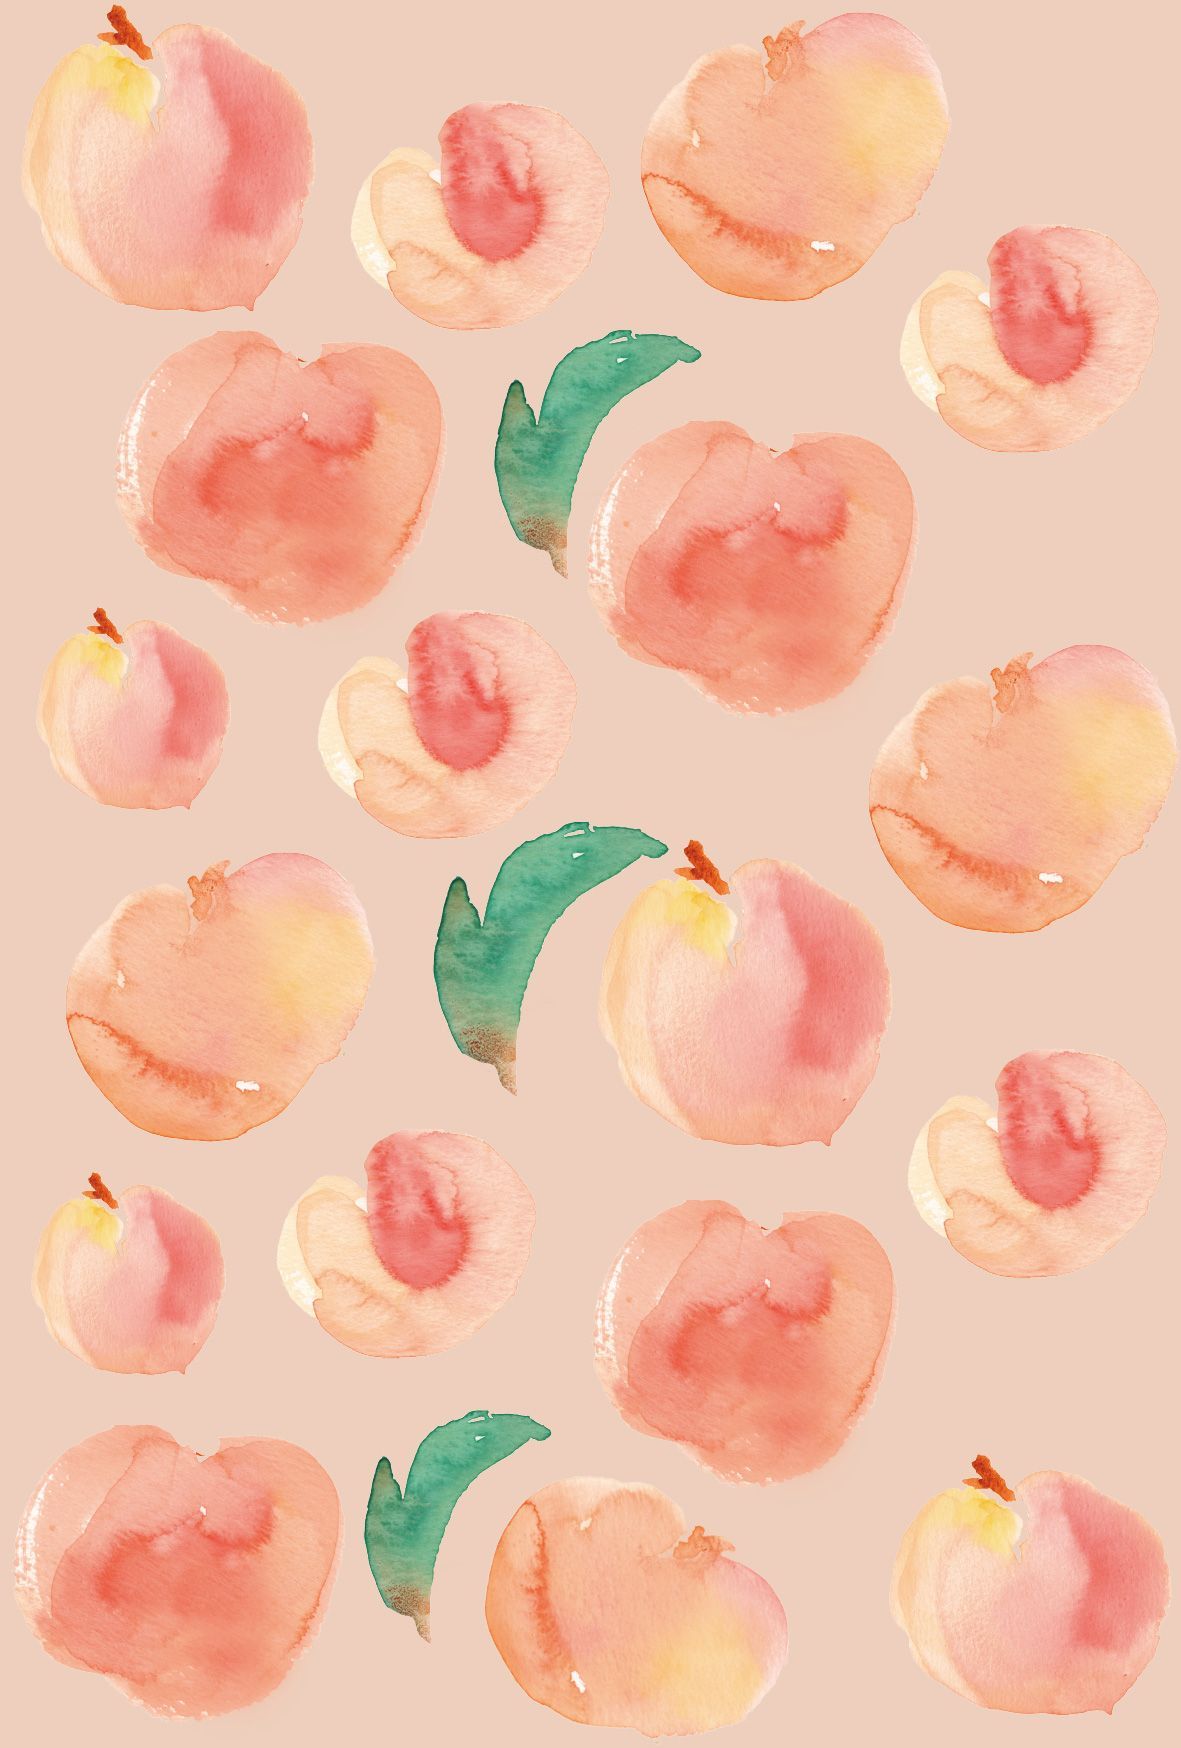 Details 100 peach aesthetic background